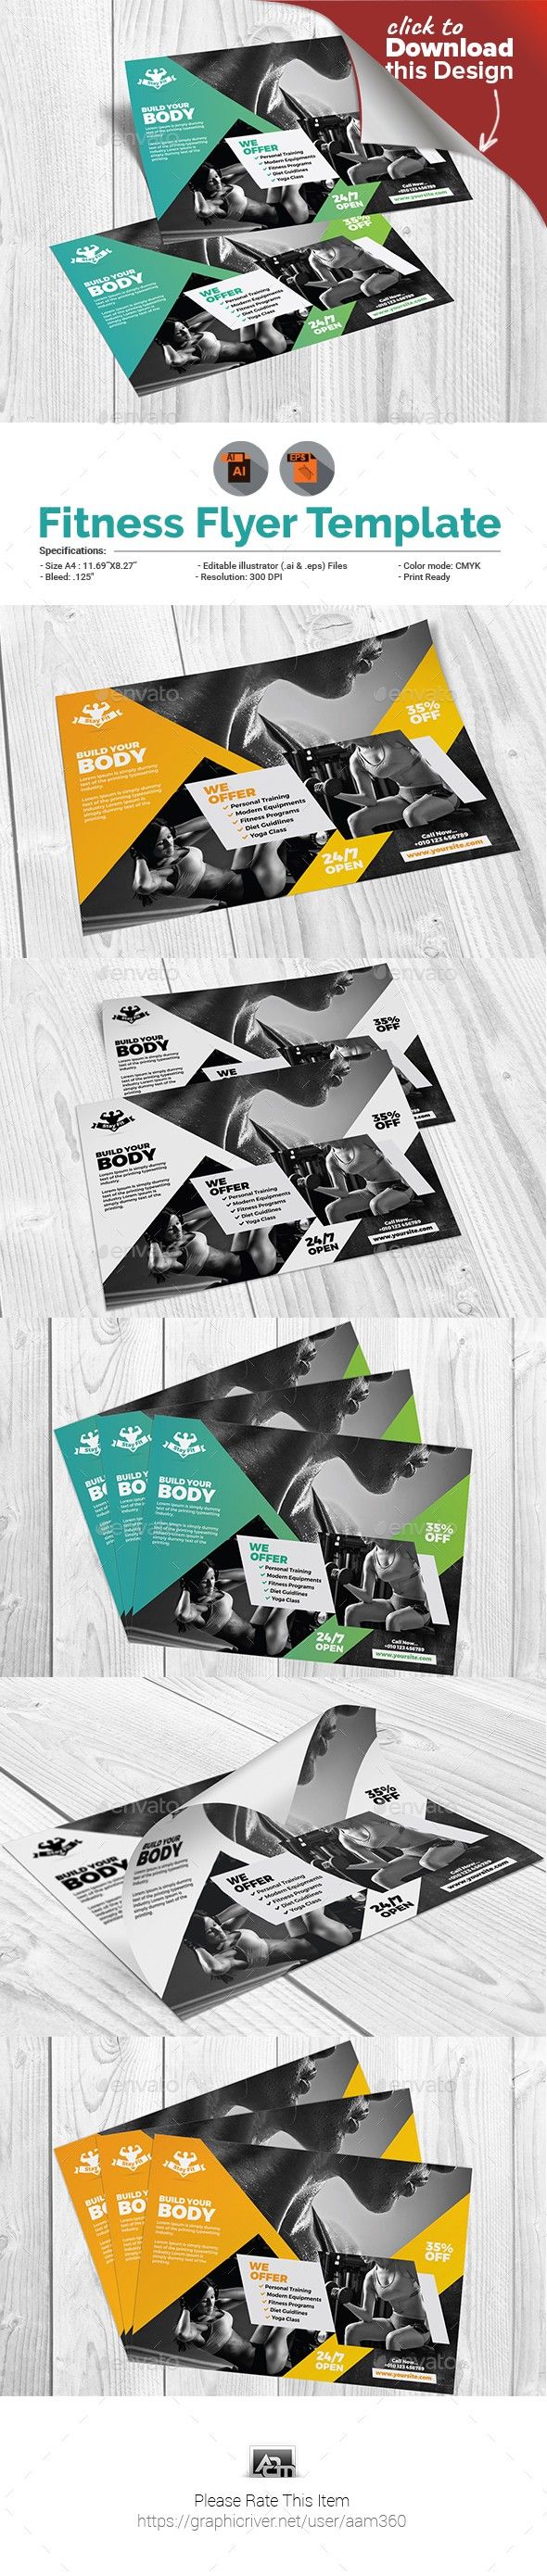 1561138468_558_Healthcare-Advertising-ad-advertising-body-bodybuilding-boxing-crossfit-diet Healthcare Advertising : ad, advertising, body, bodybuilding, boxing, crossfit, diet, energy, fit, fitnes...